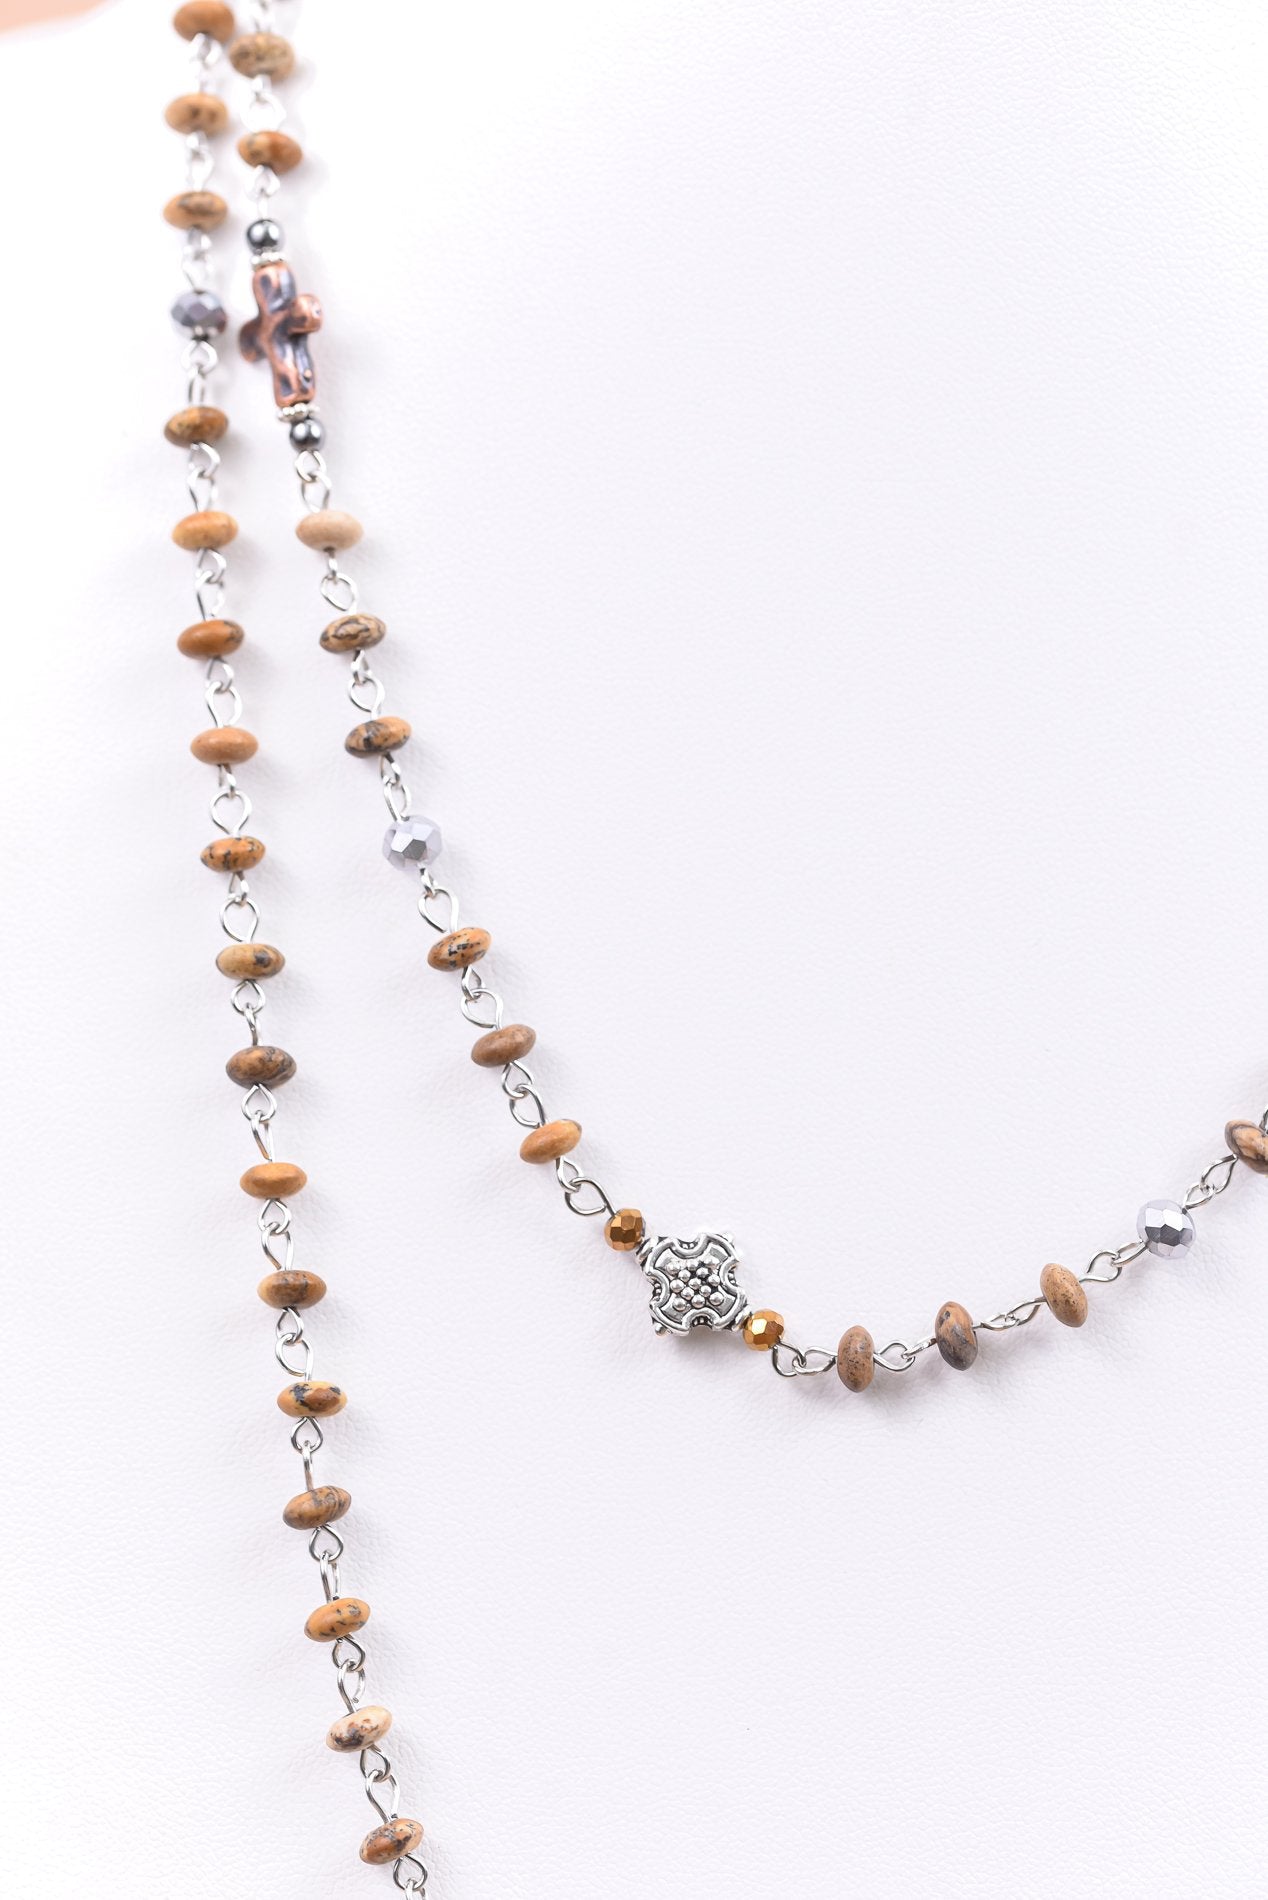 Silver/Brown/Beaded/Cross Charm Long Strand Necklace - NEK3942SI